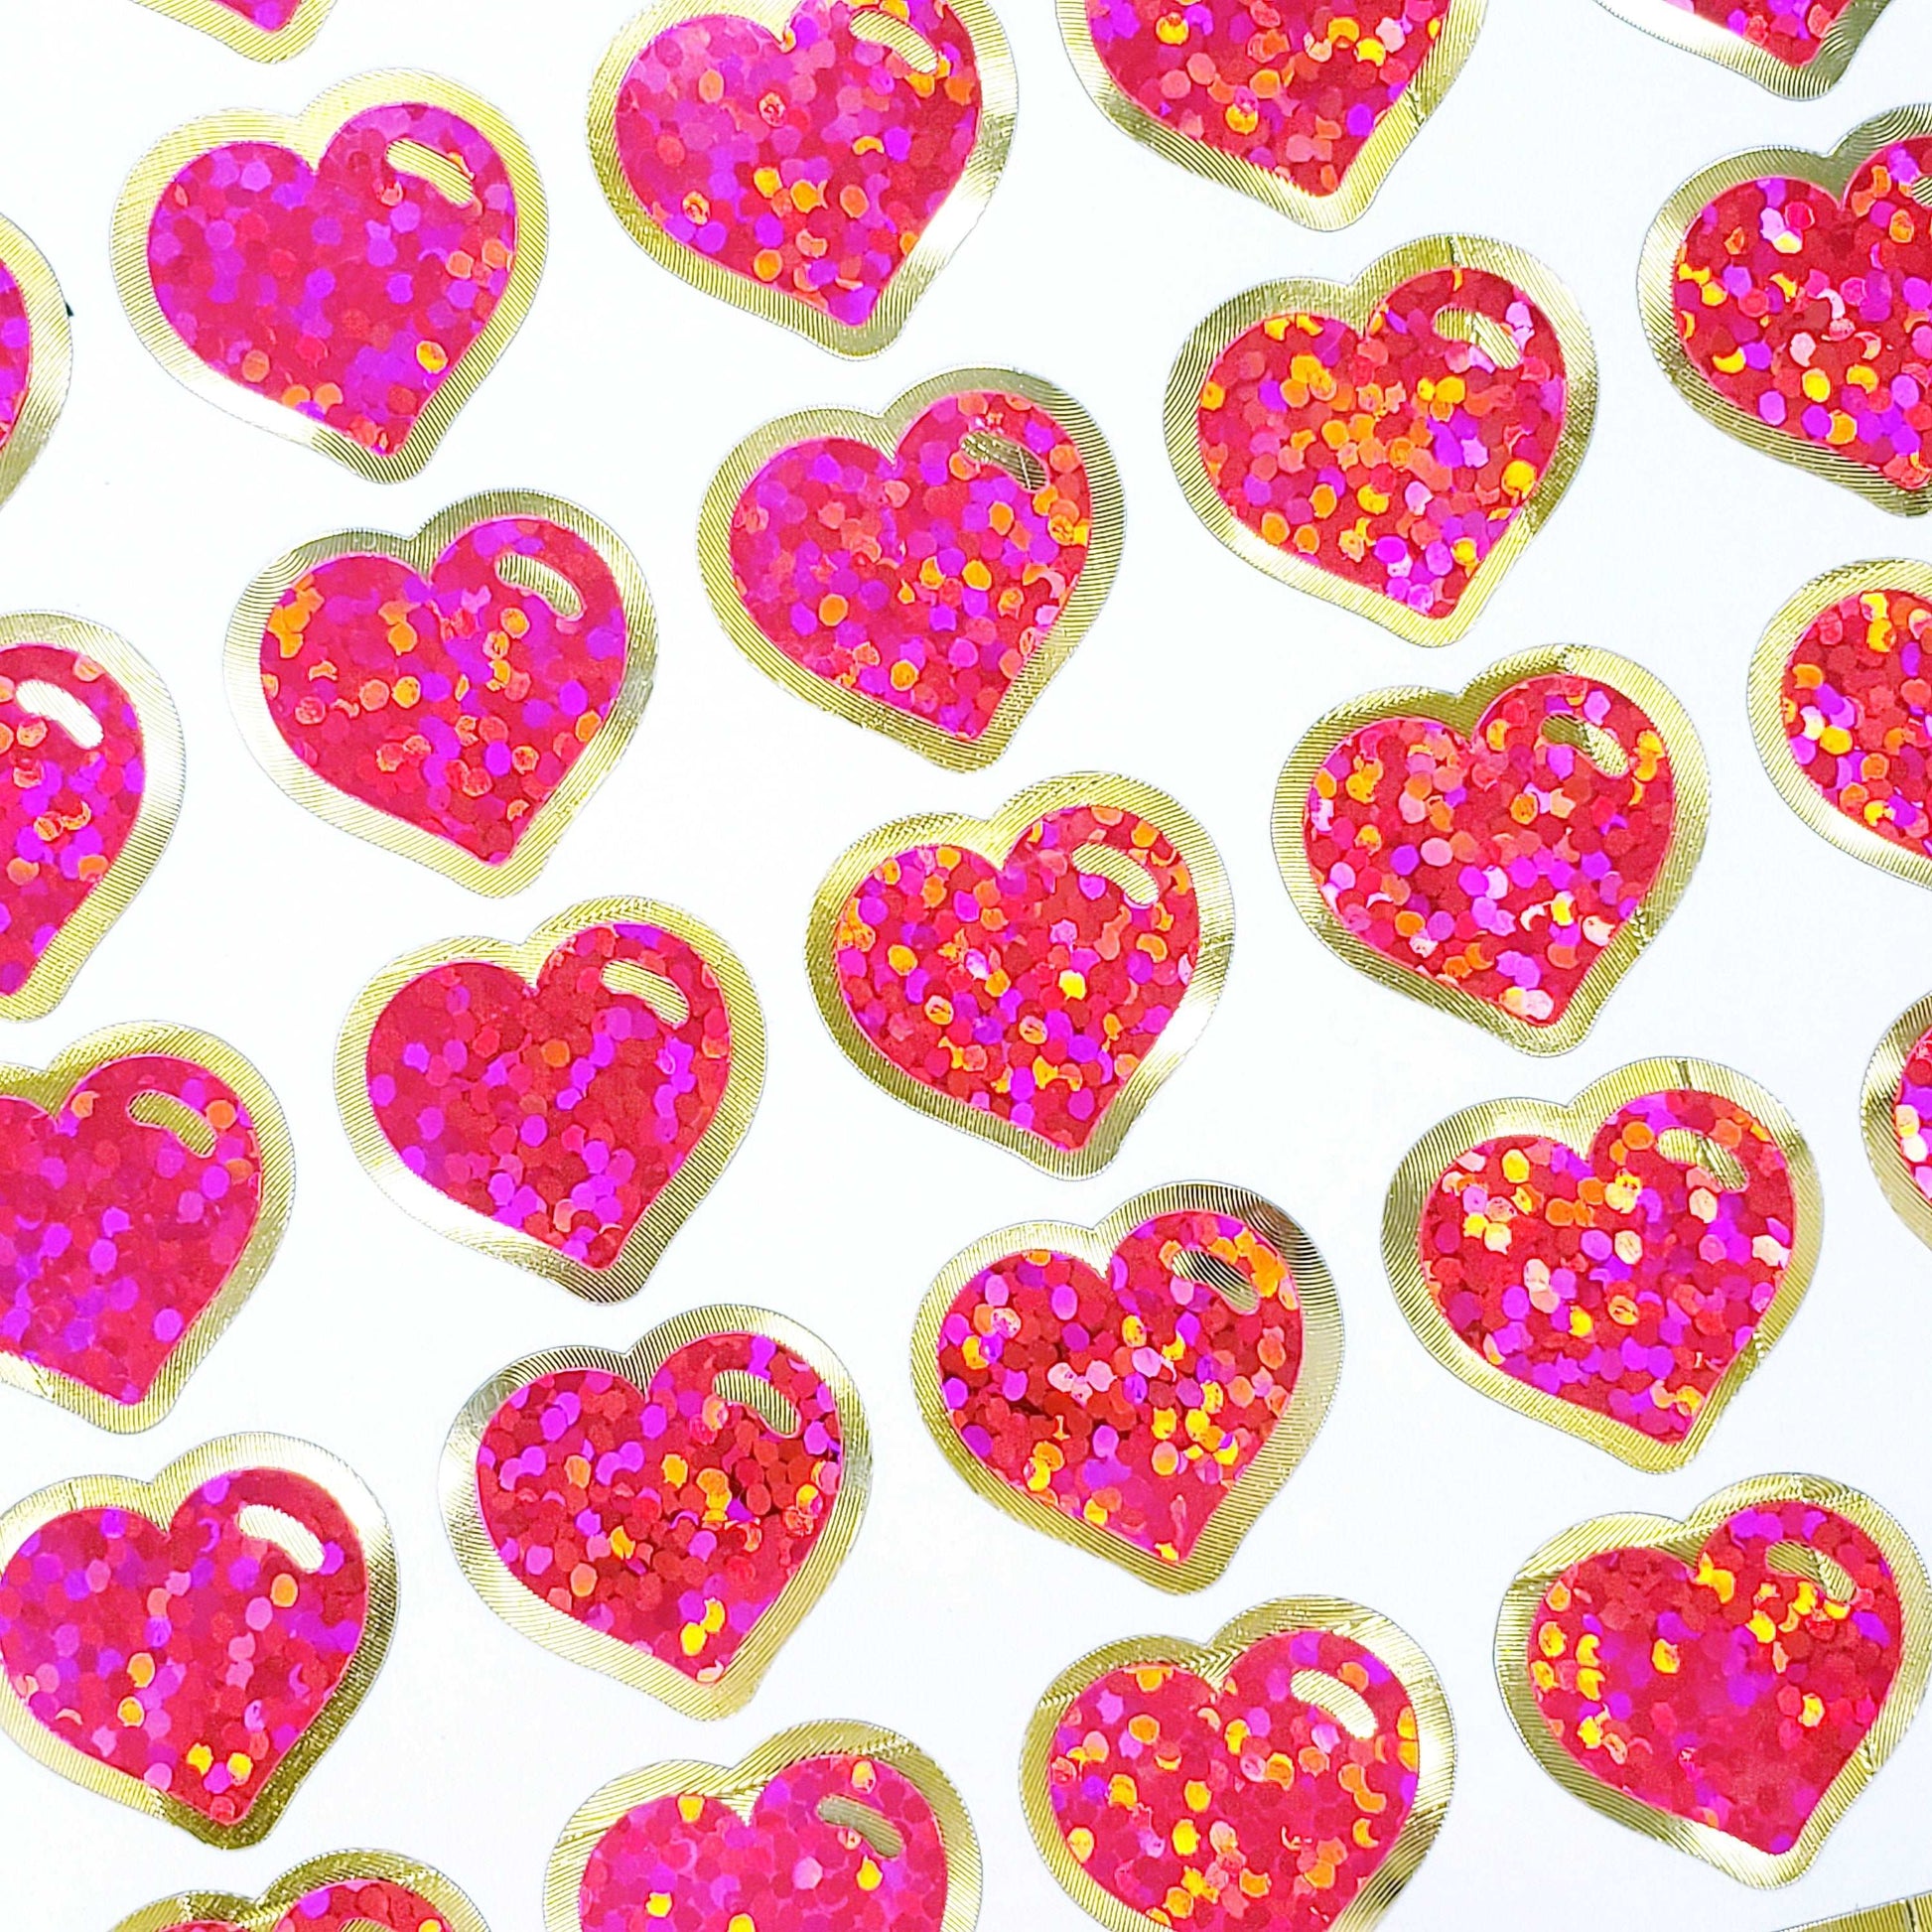 Pink and Gold Hearts Sticker Sheet, set of 60 tiny pink heart stickers for planners, charts, journals, love notes, envelopes and scrapbooks.